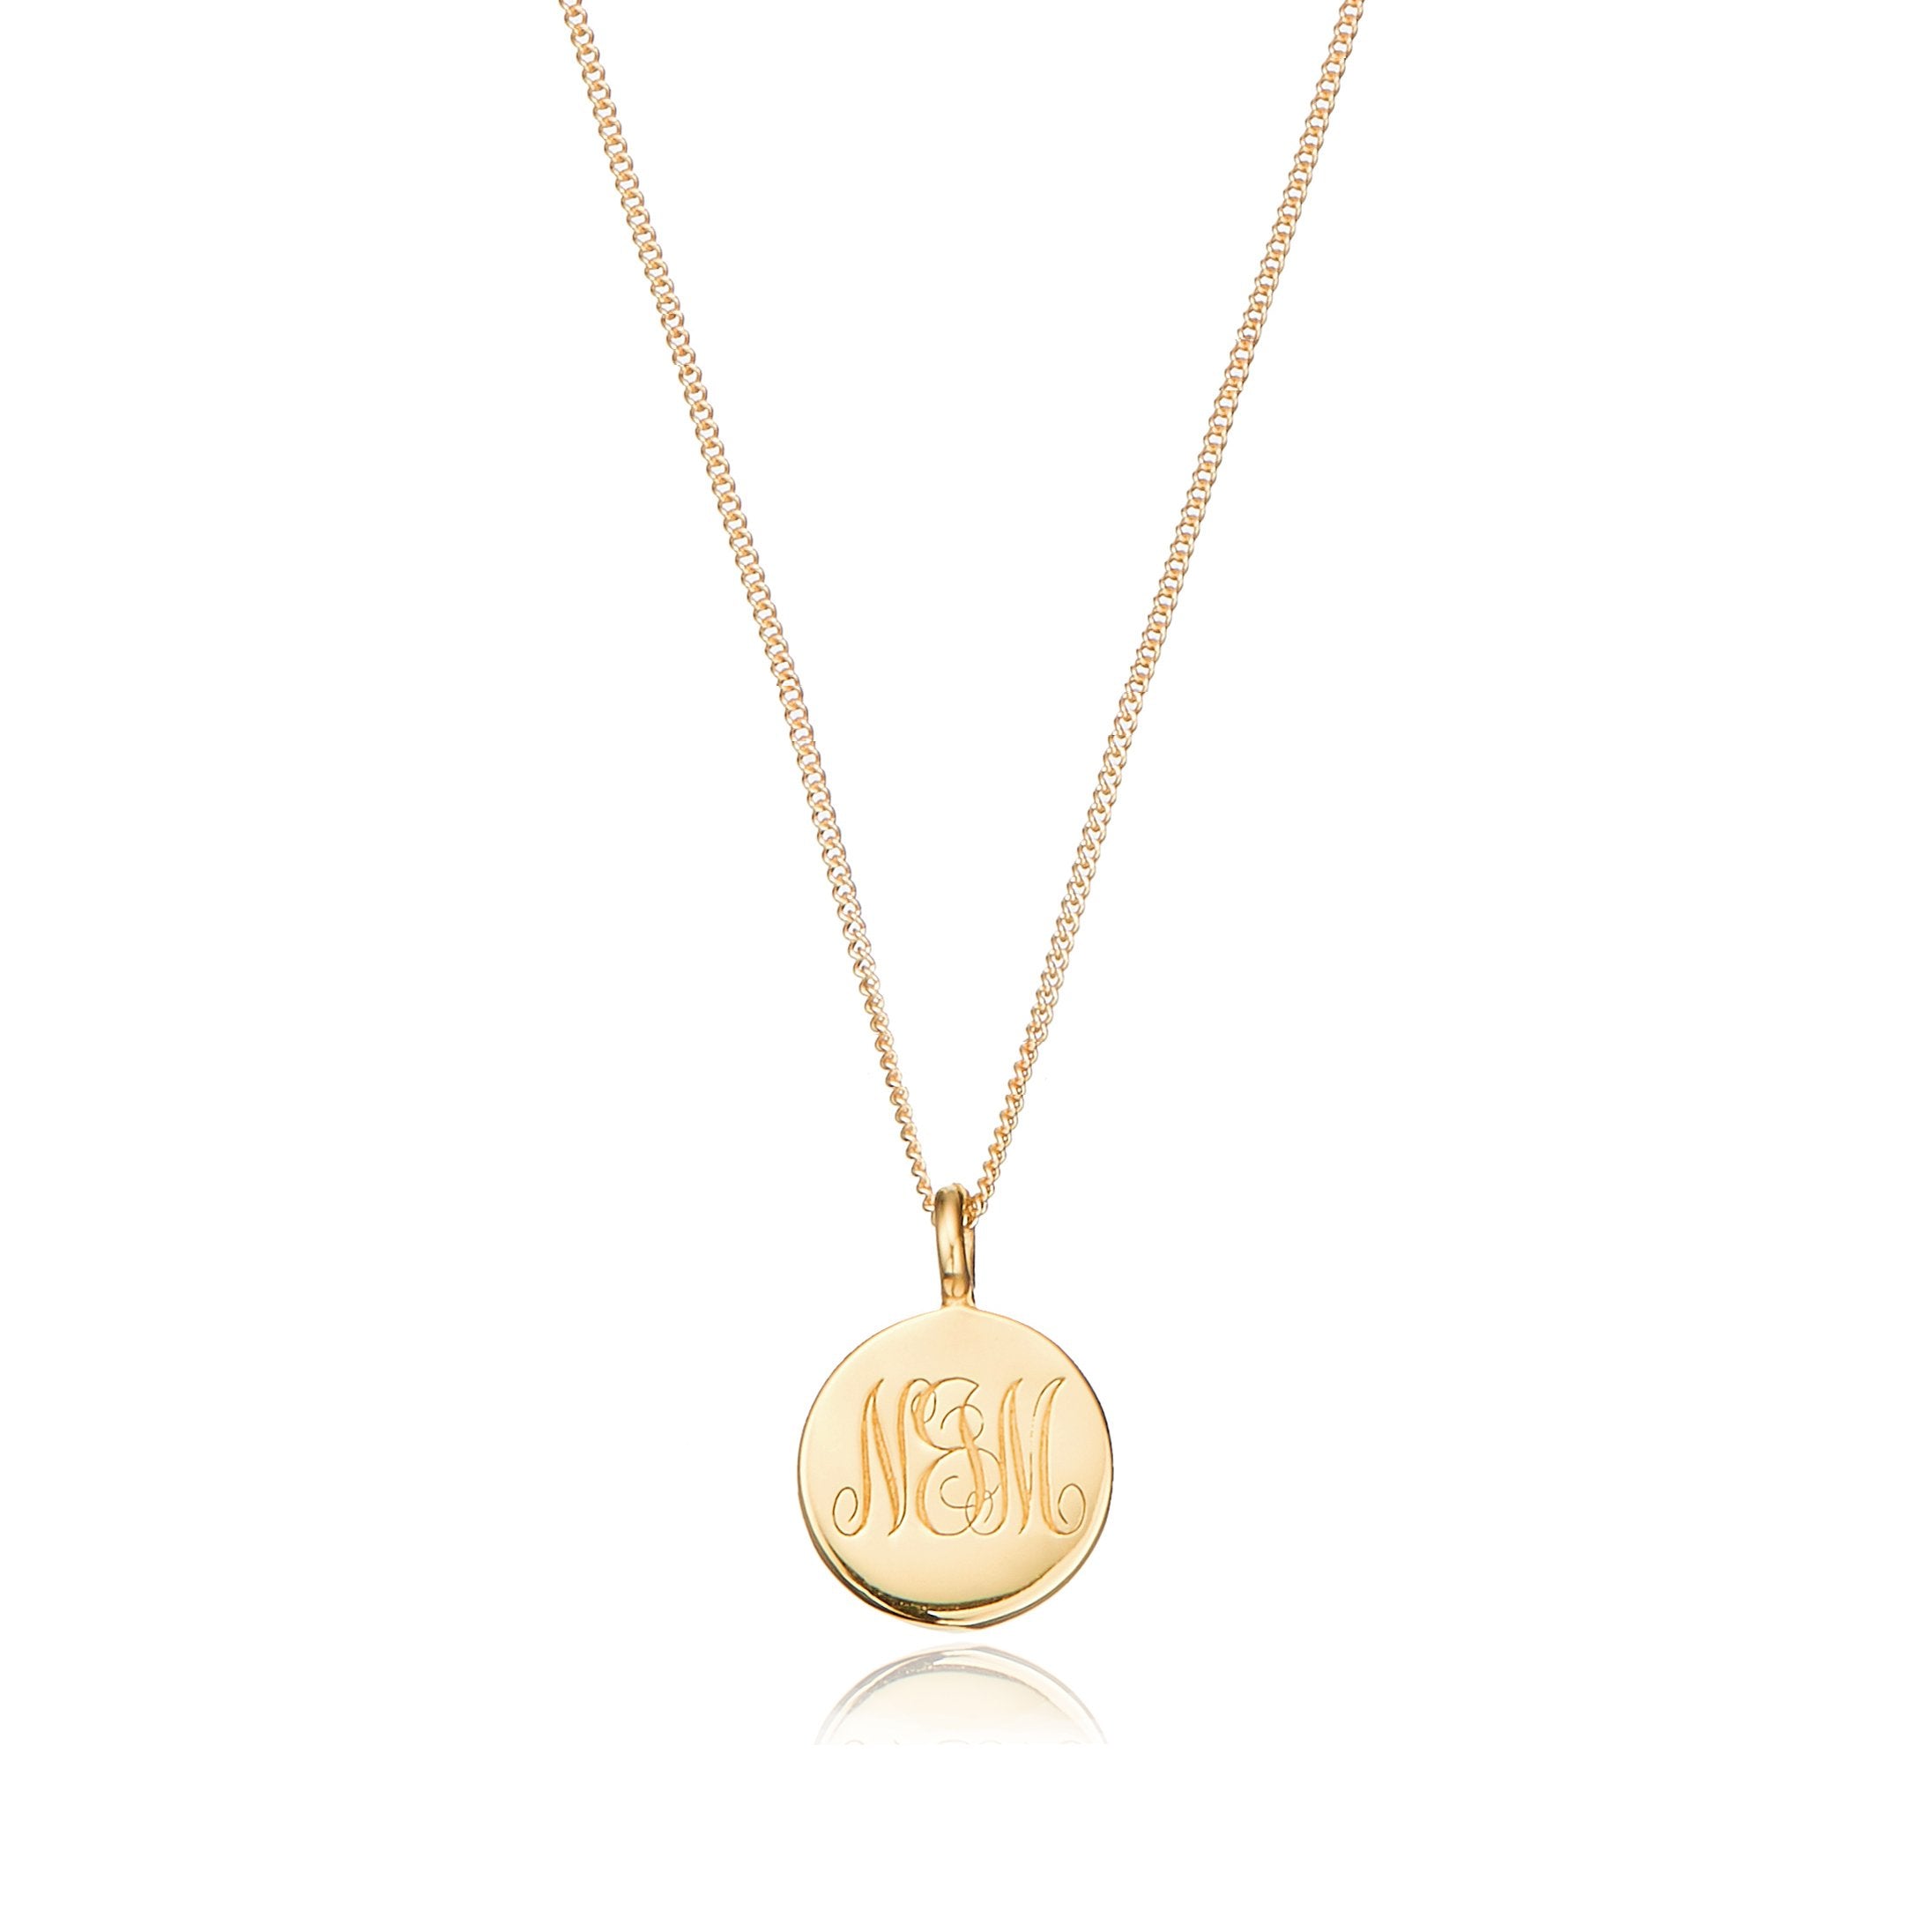 Gold large engraved disc necklace with N&M engraved on a white background